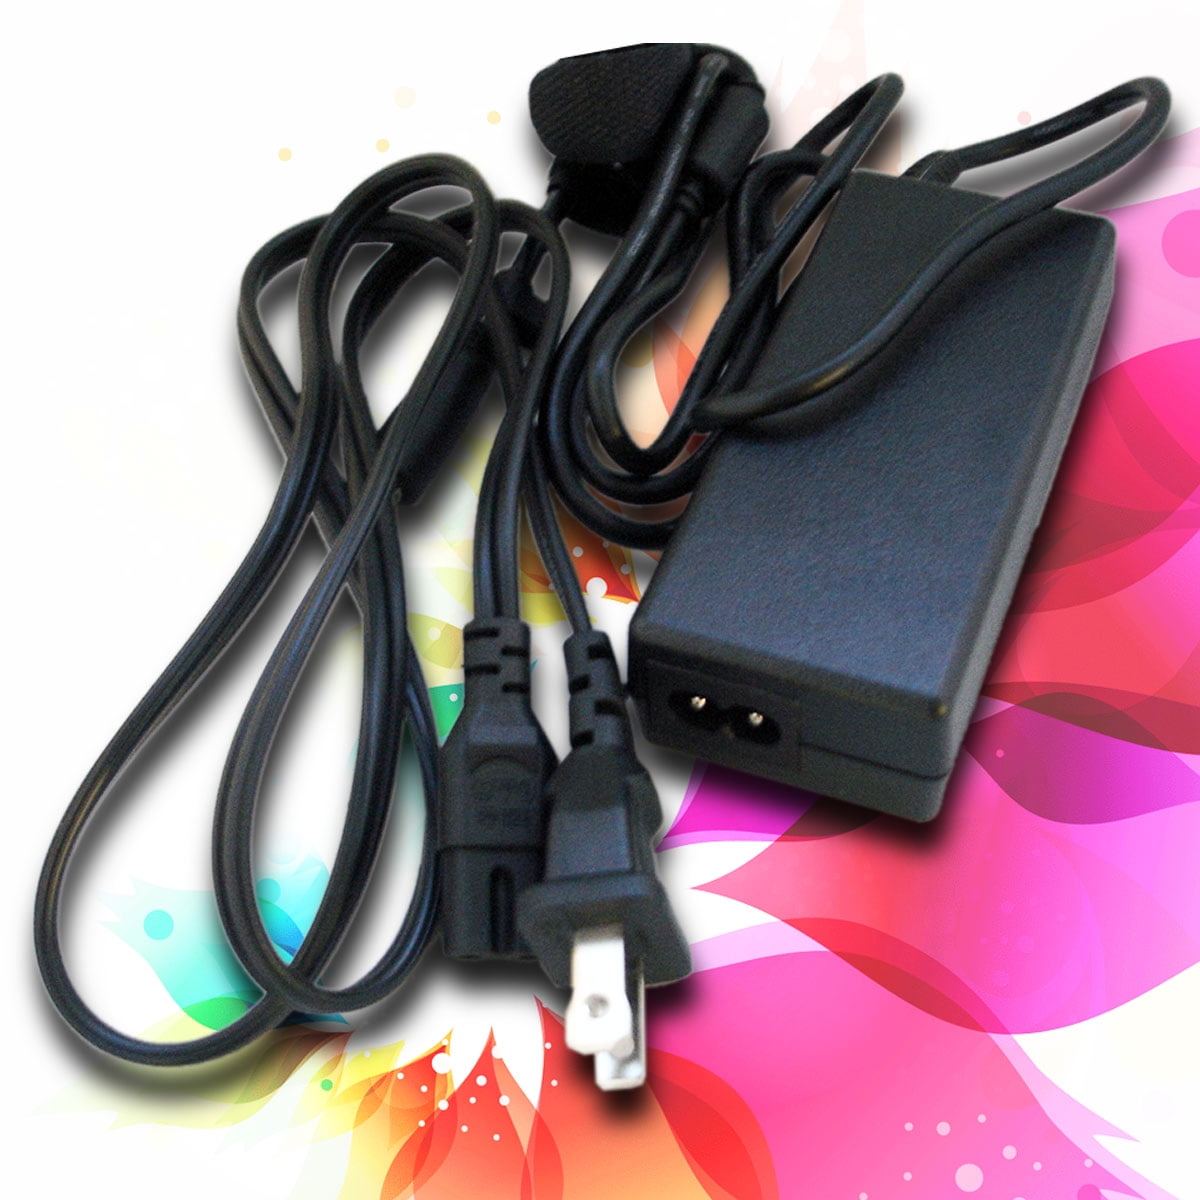 yan Laptop AC Power Battery Charger for HP Compaq Mini 5101 5102 5103 2100 2140 2133 